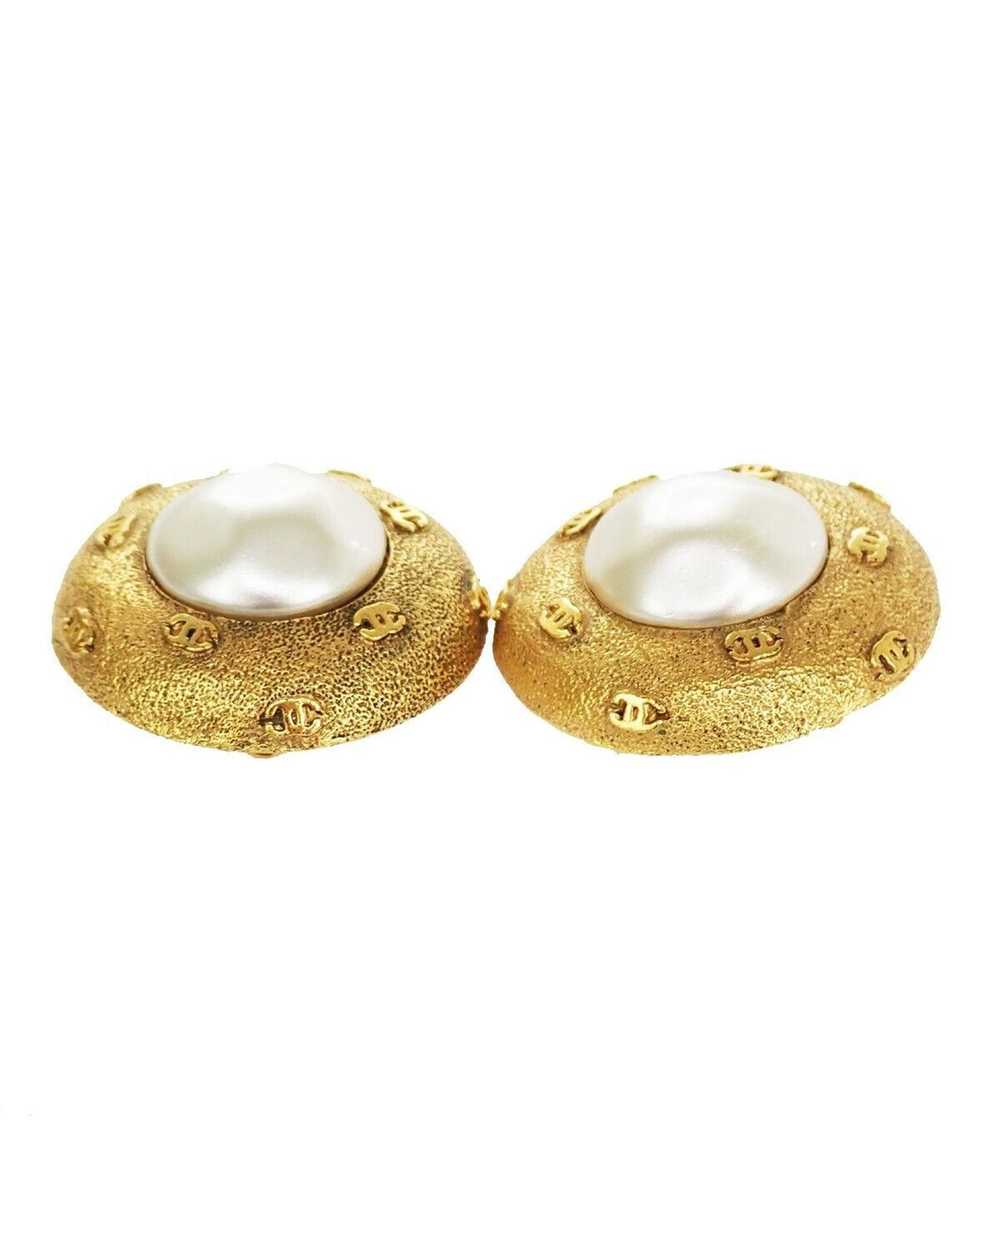 Chanel Coco Mark Button Earrings - image 4